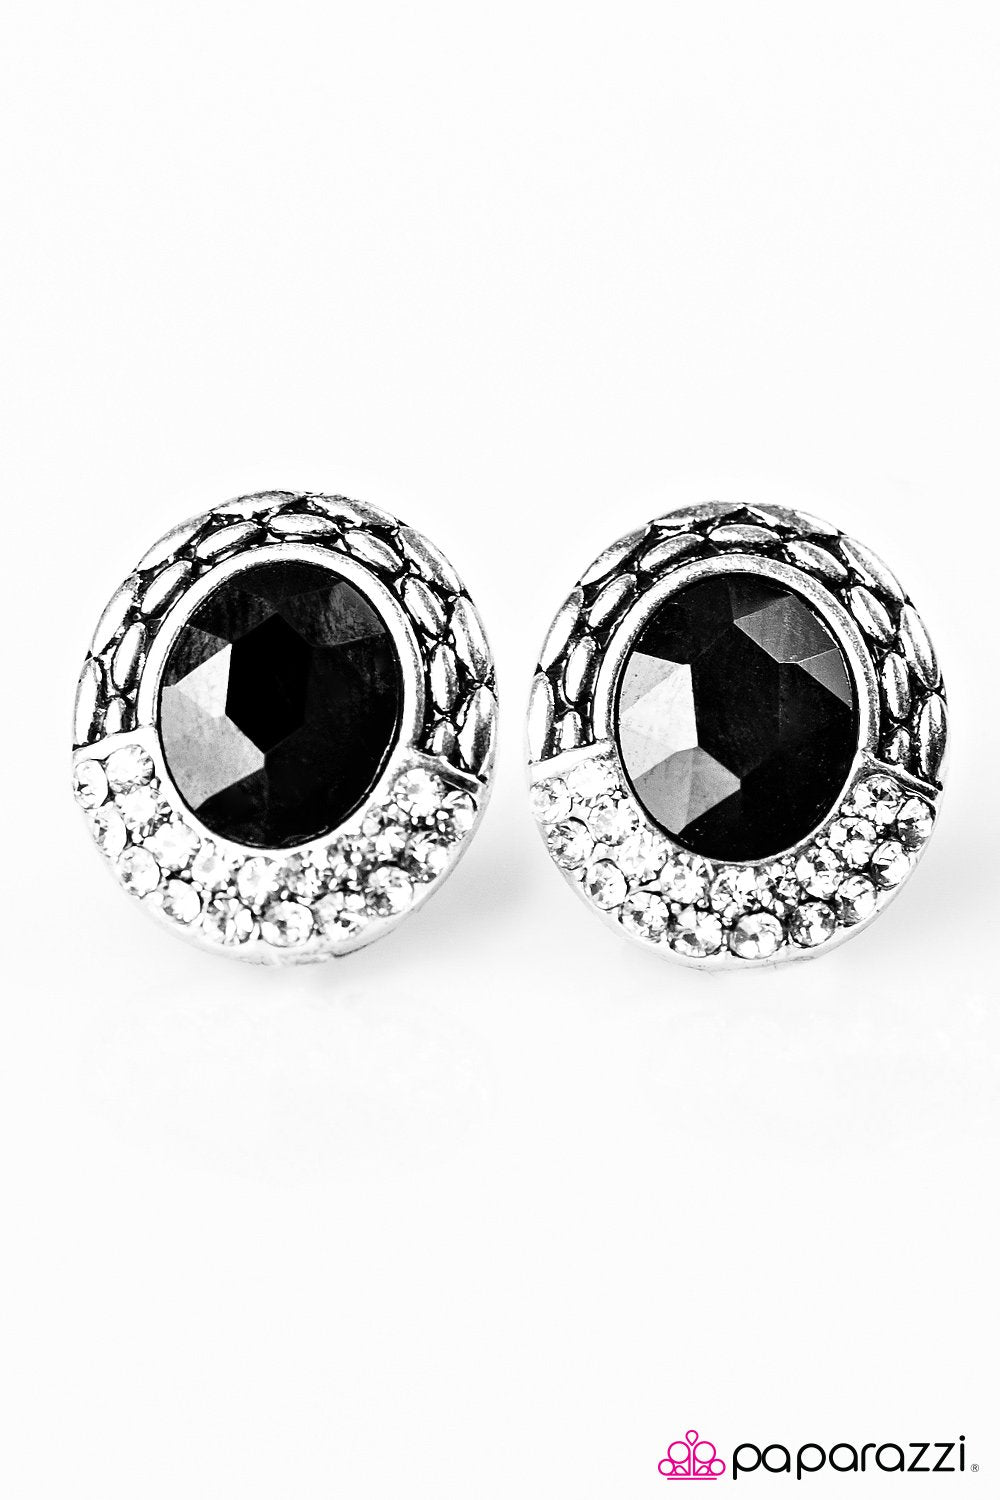 Go Go Glitter Black Post Earrings - Paparazzi Accessories-CarasShop.com - $5 Jewelry by Cara Jewels